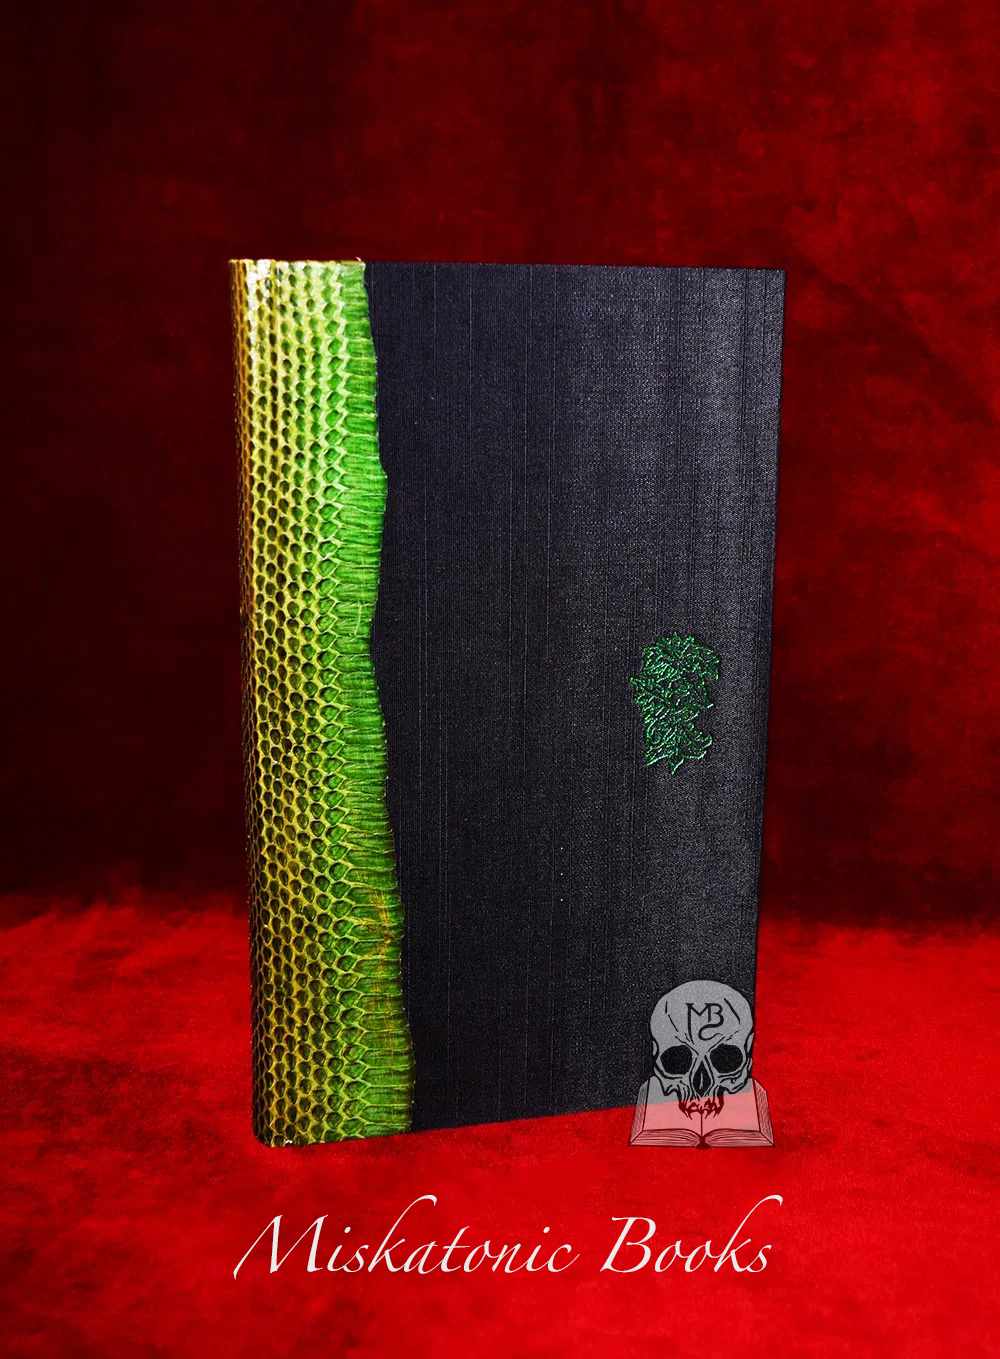 VENEFICIUM: Magic, Witchcraft and the Poison Path by Daniel A. Schulke - Deluxe Edition Bound in Quarter Emerald Green Snakeskin